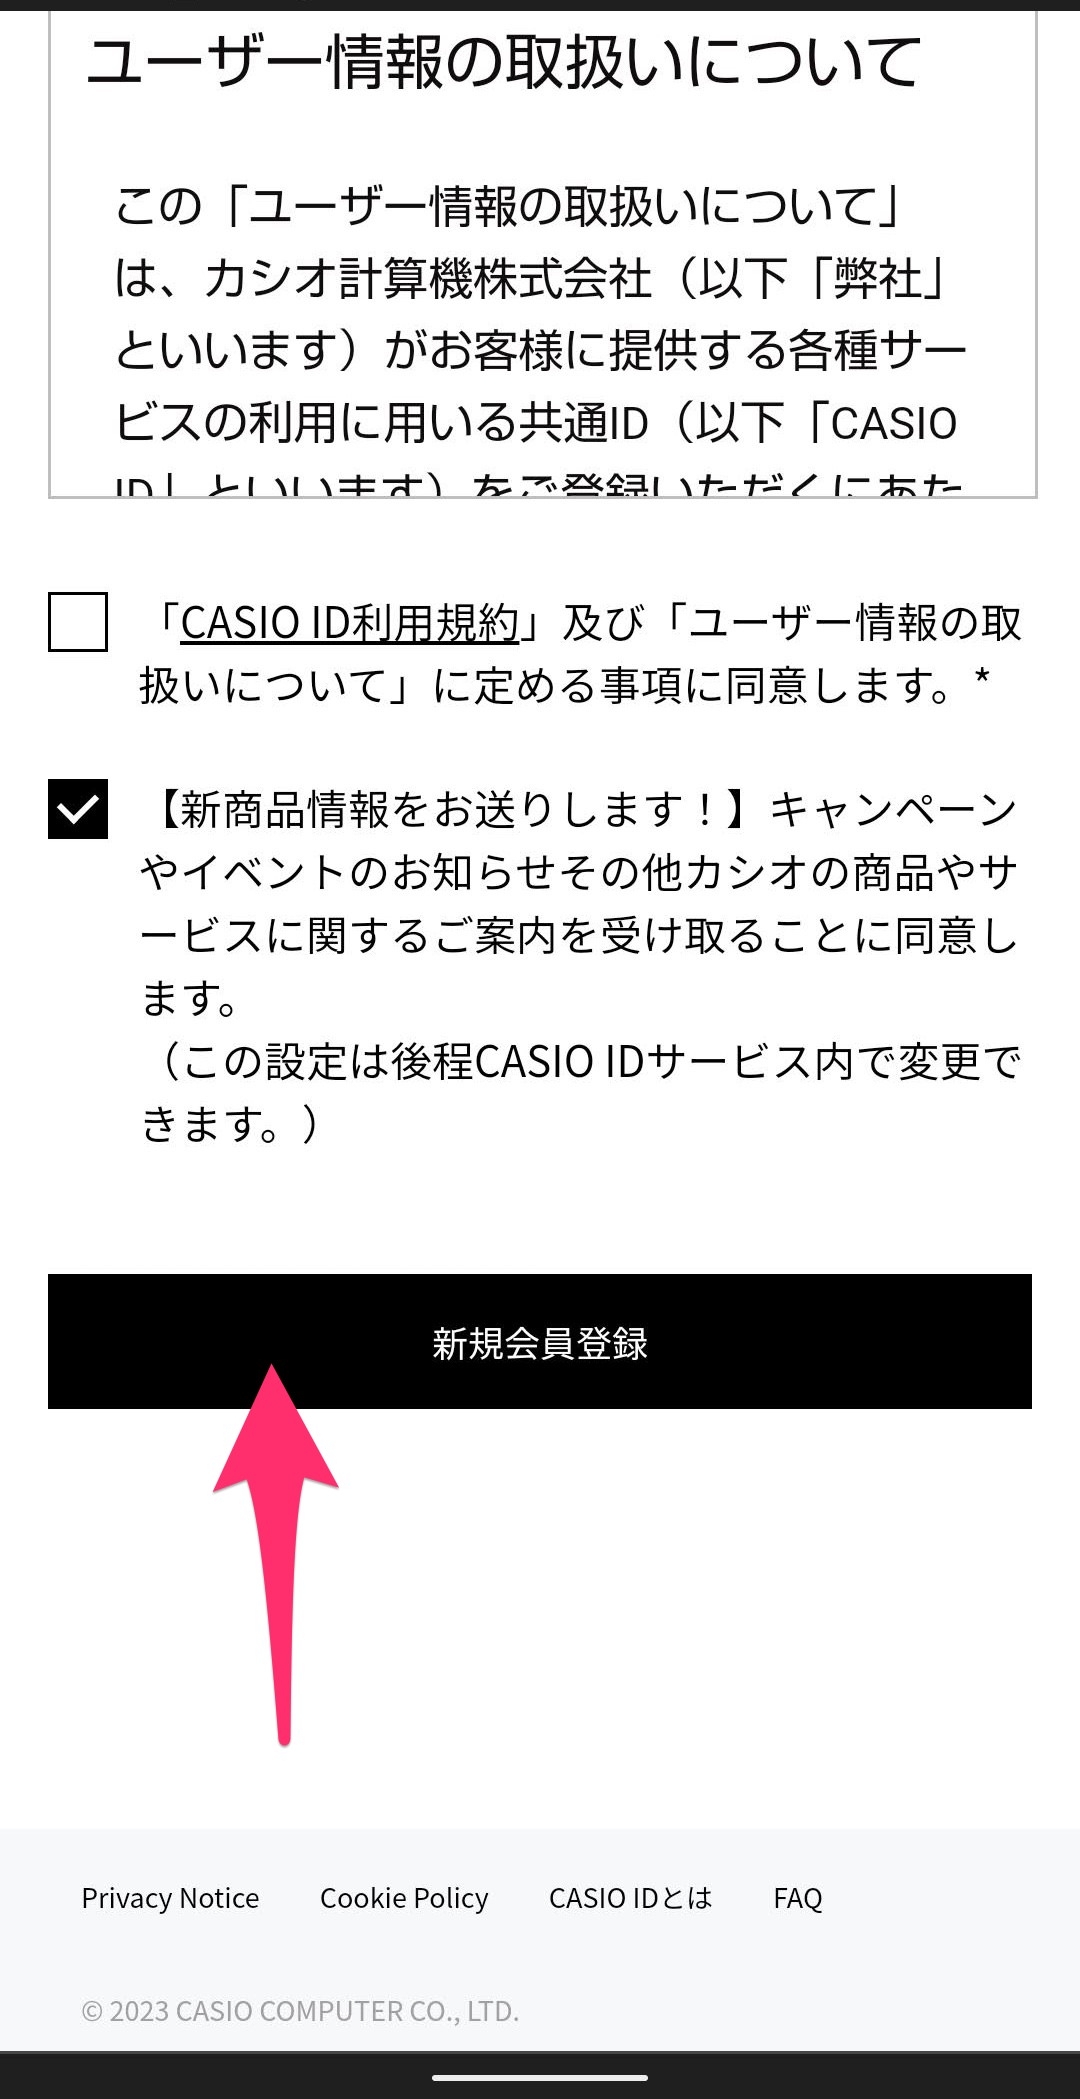 CASIO WATCHES　CASIO IDに新規登録　利用規約